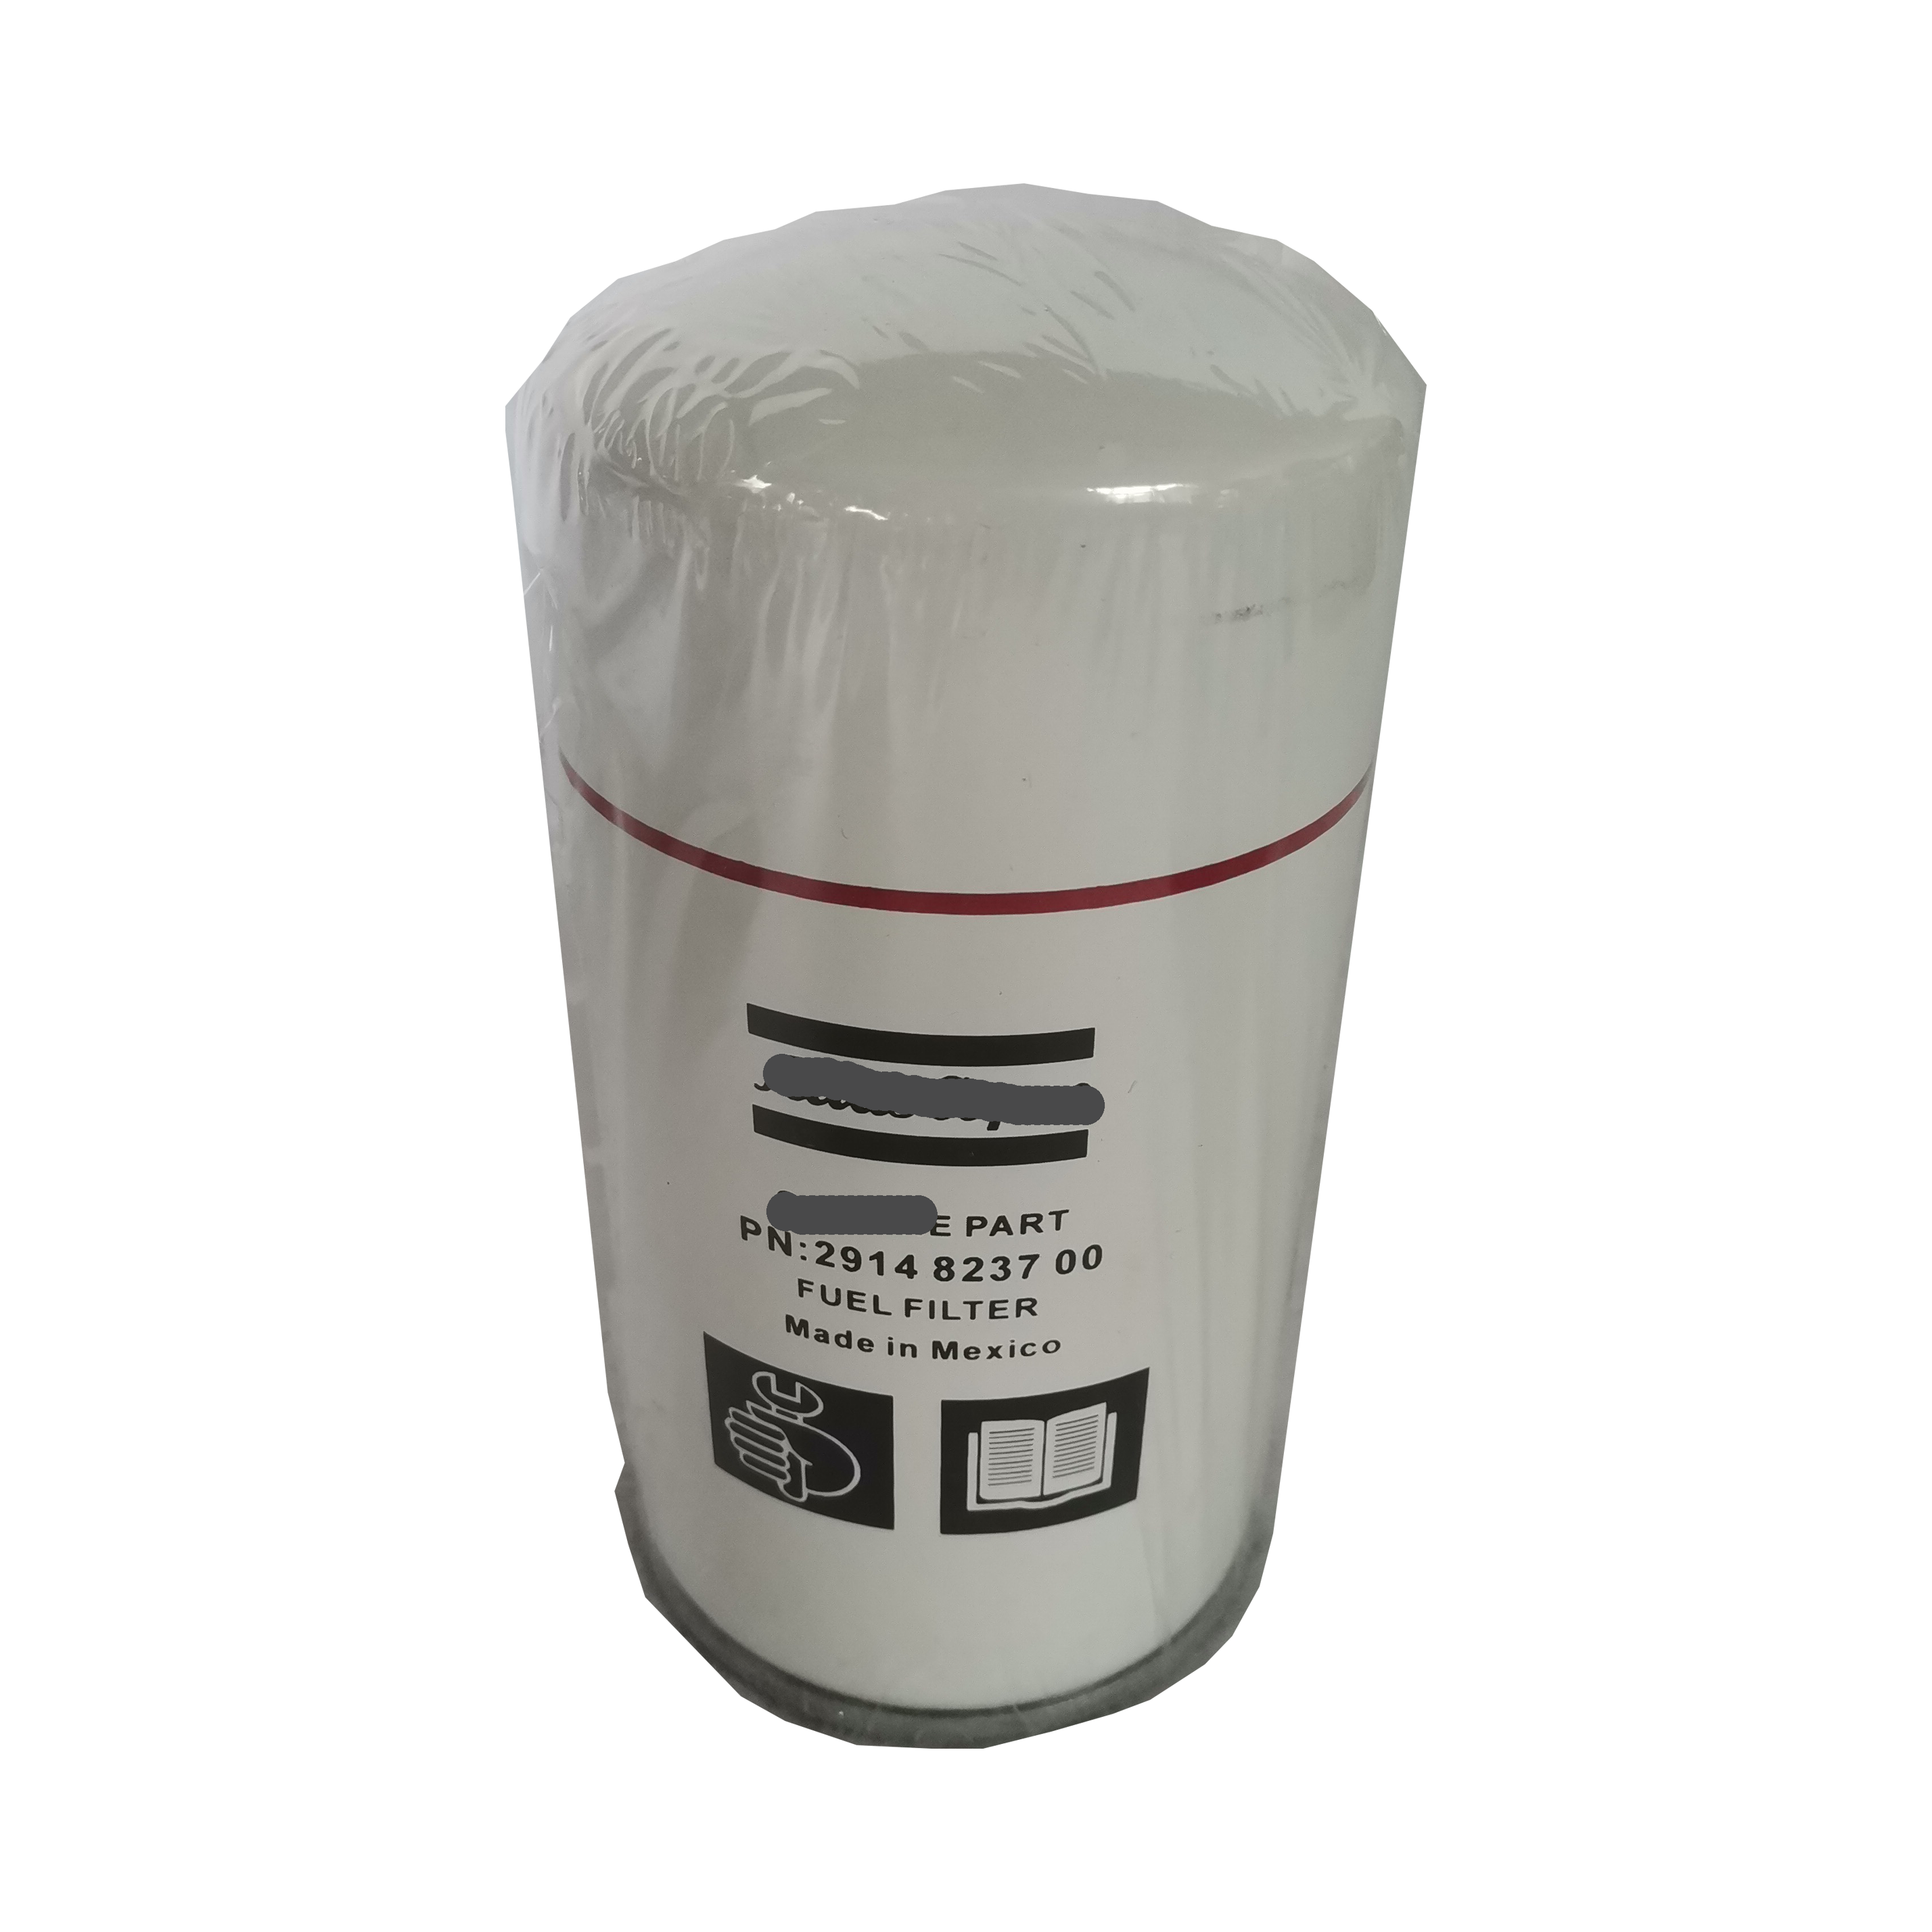 Wholesale Replace Atlas Copco Filter Element for Air Compressor Oil Filter 2914866000 2914823600 2914823700